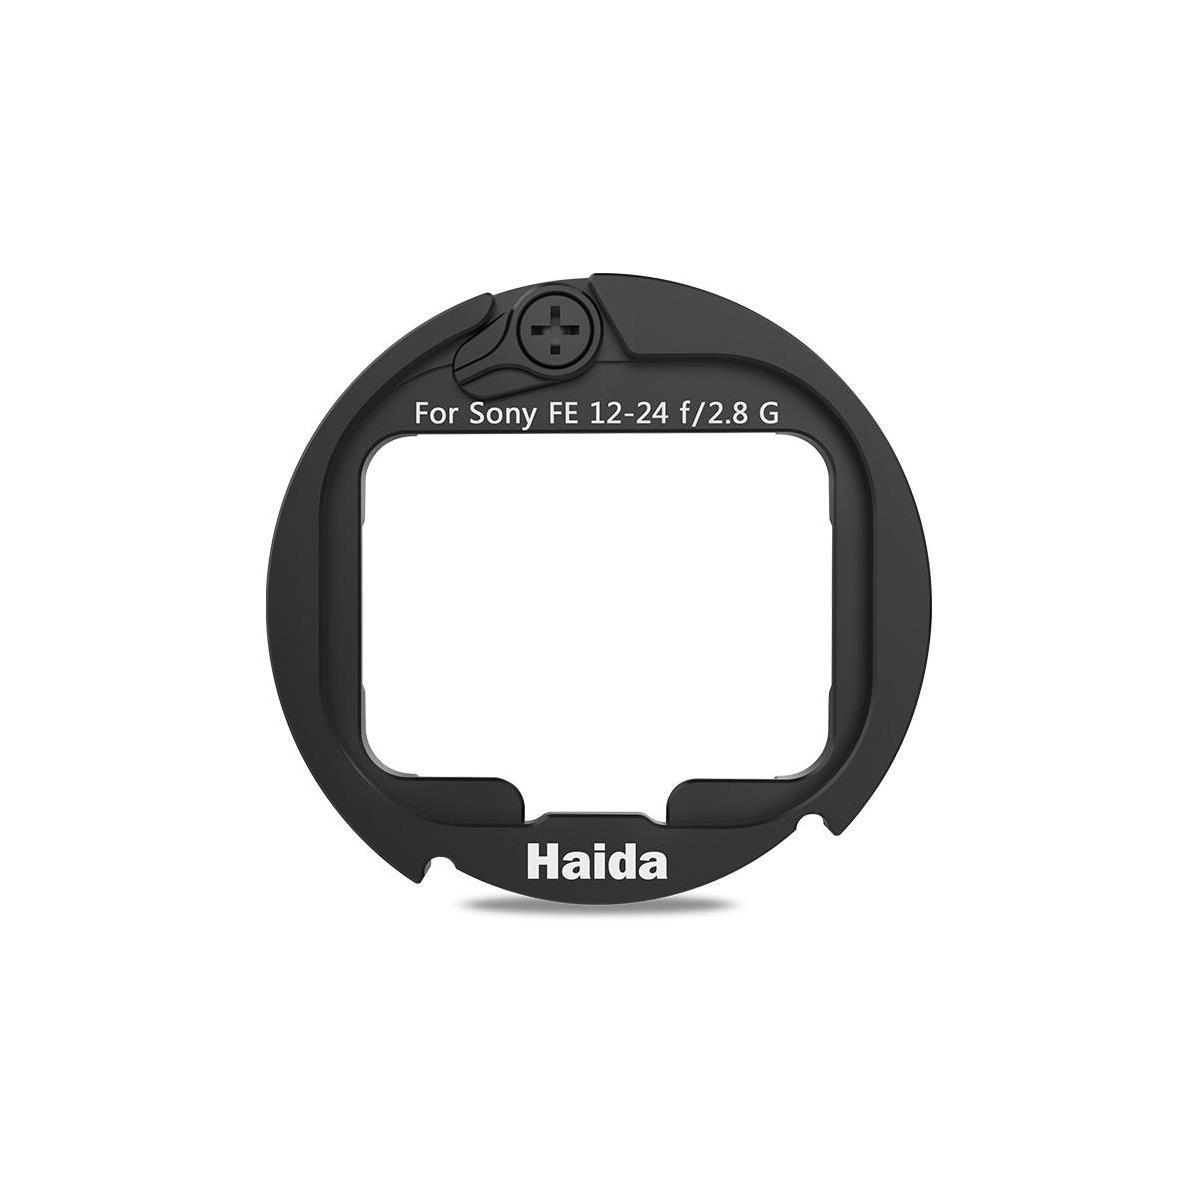 Haida Rear Lens ND Filter Kit for Sony FE 12-24mm f/2.8 GM Lens with Adapter Ring